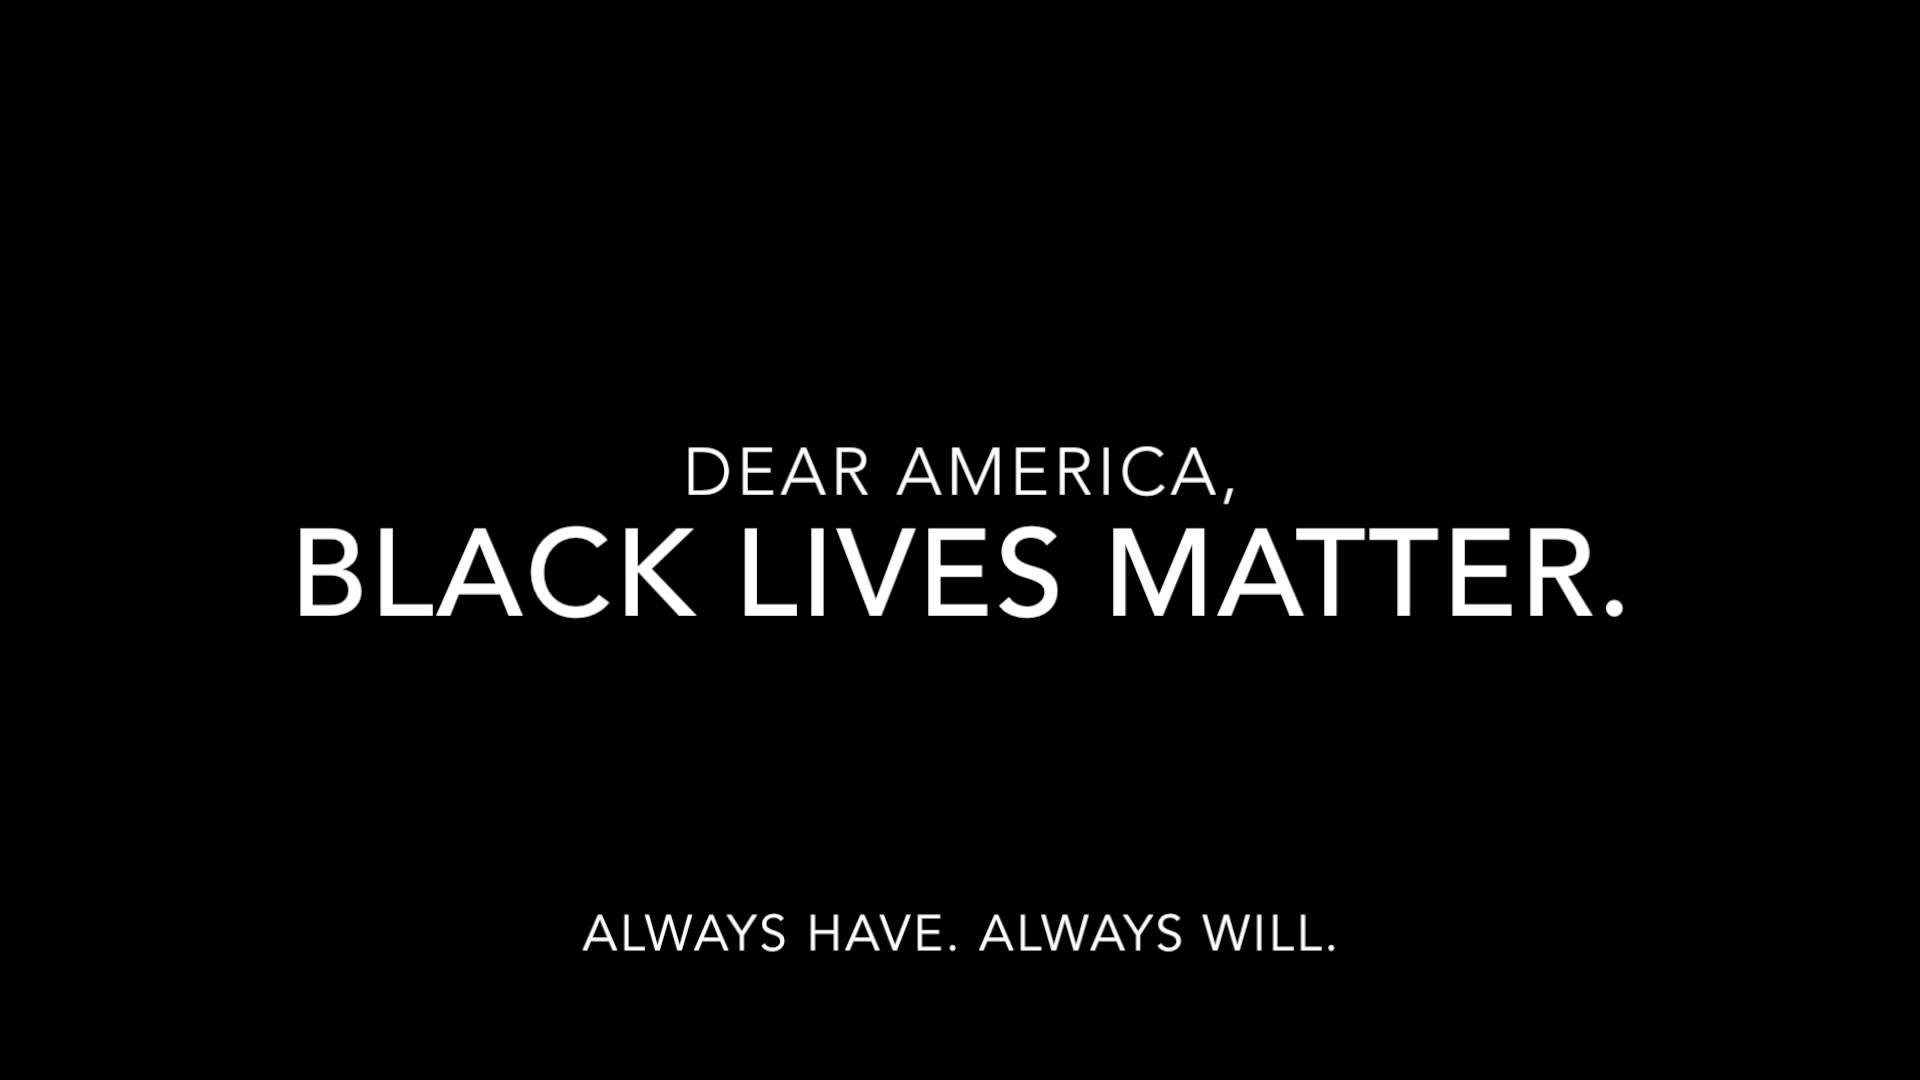 Why Blacklivesmatter And Should Will Continue To Matter